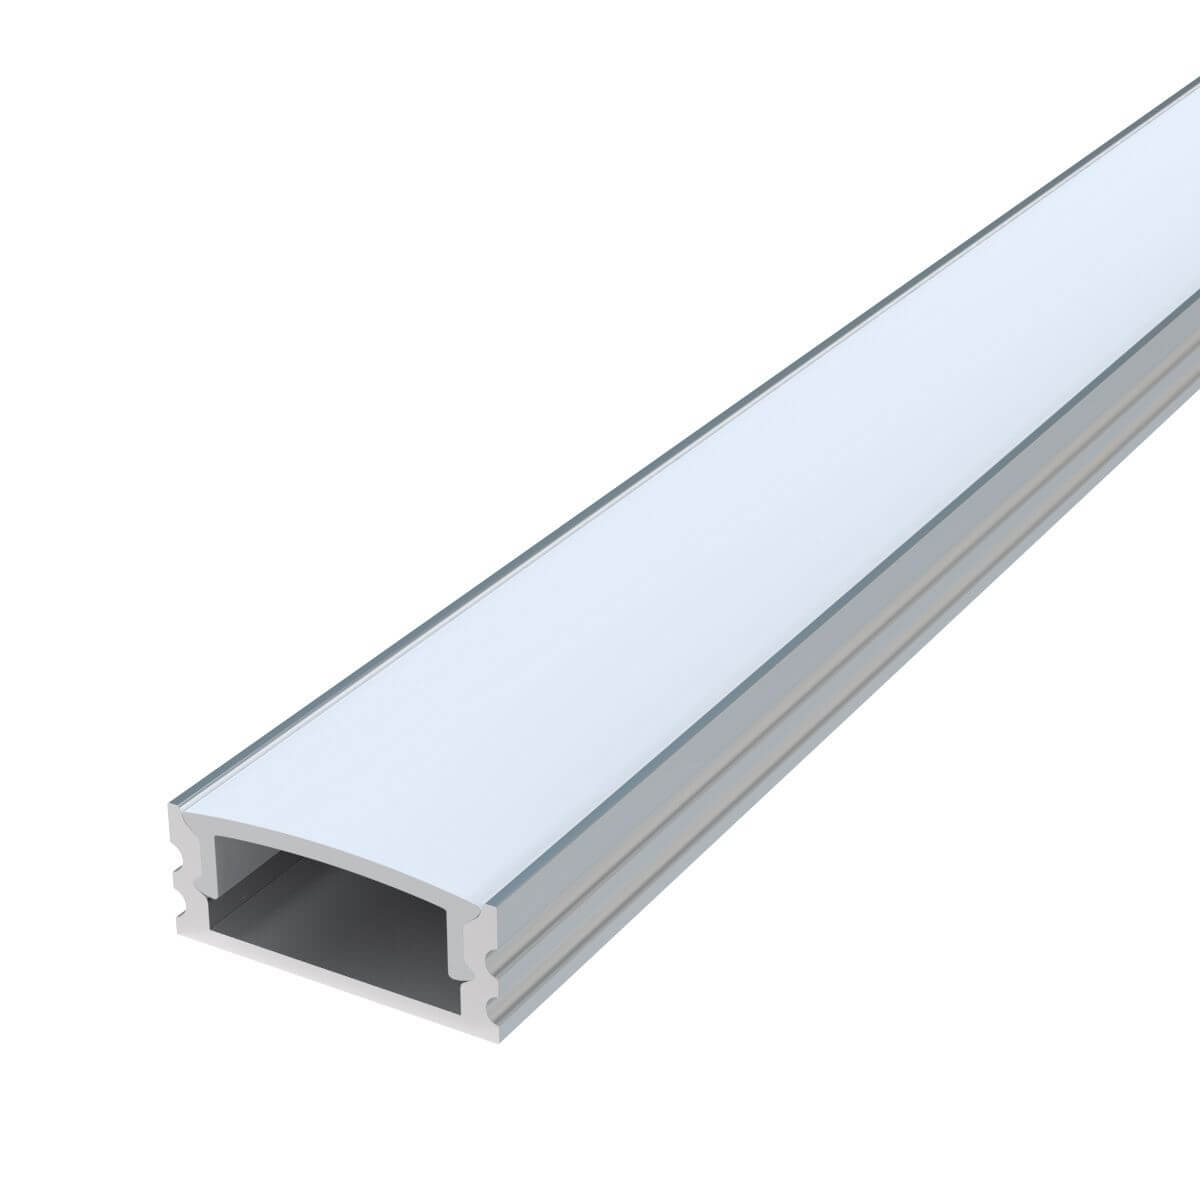 View 1m Long Shallow 7mm Surface Mounted LED Aluminium Profile information